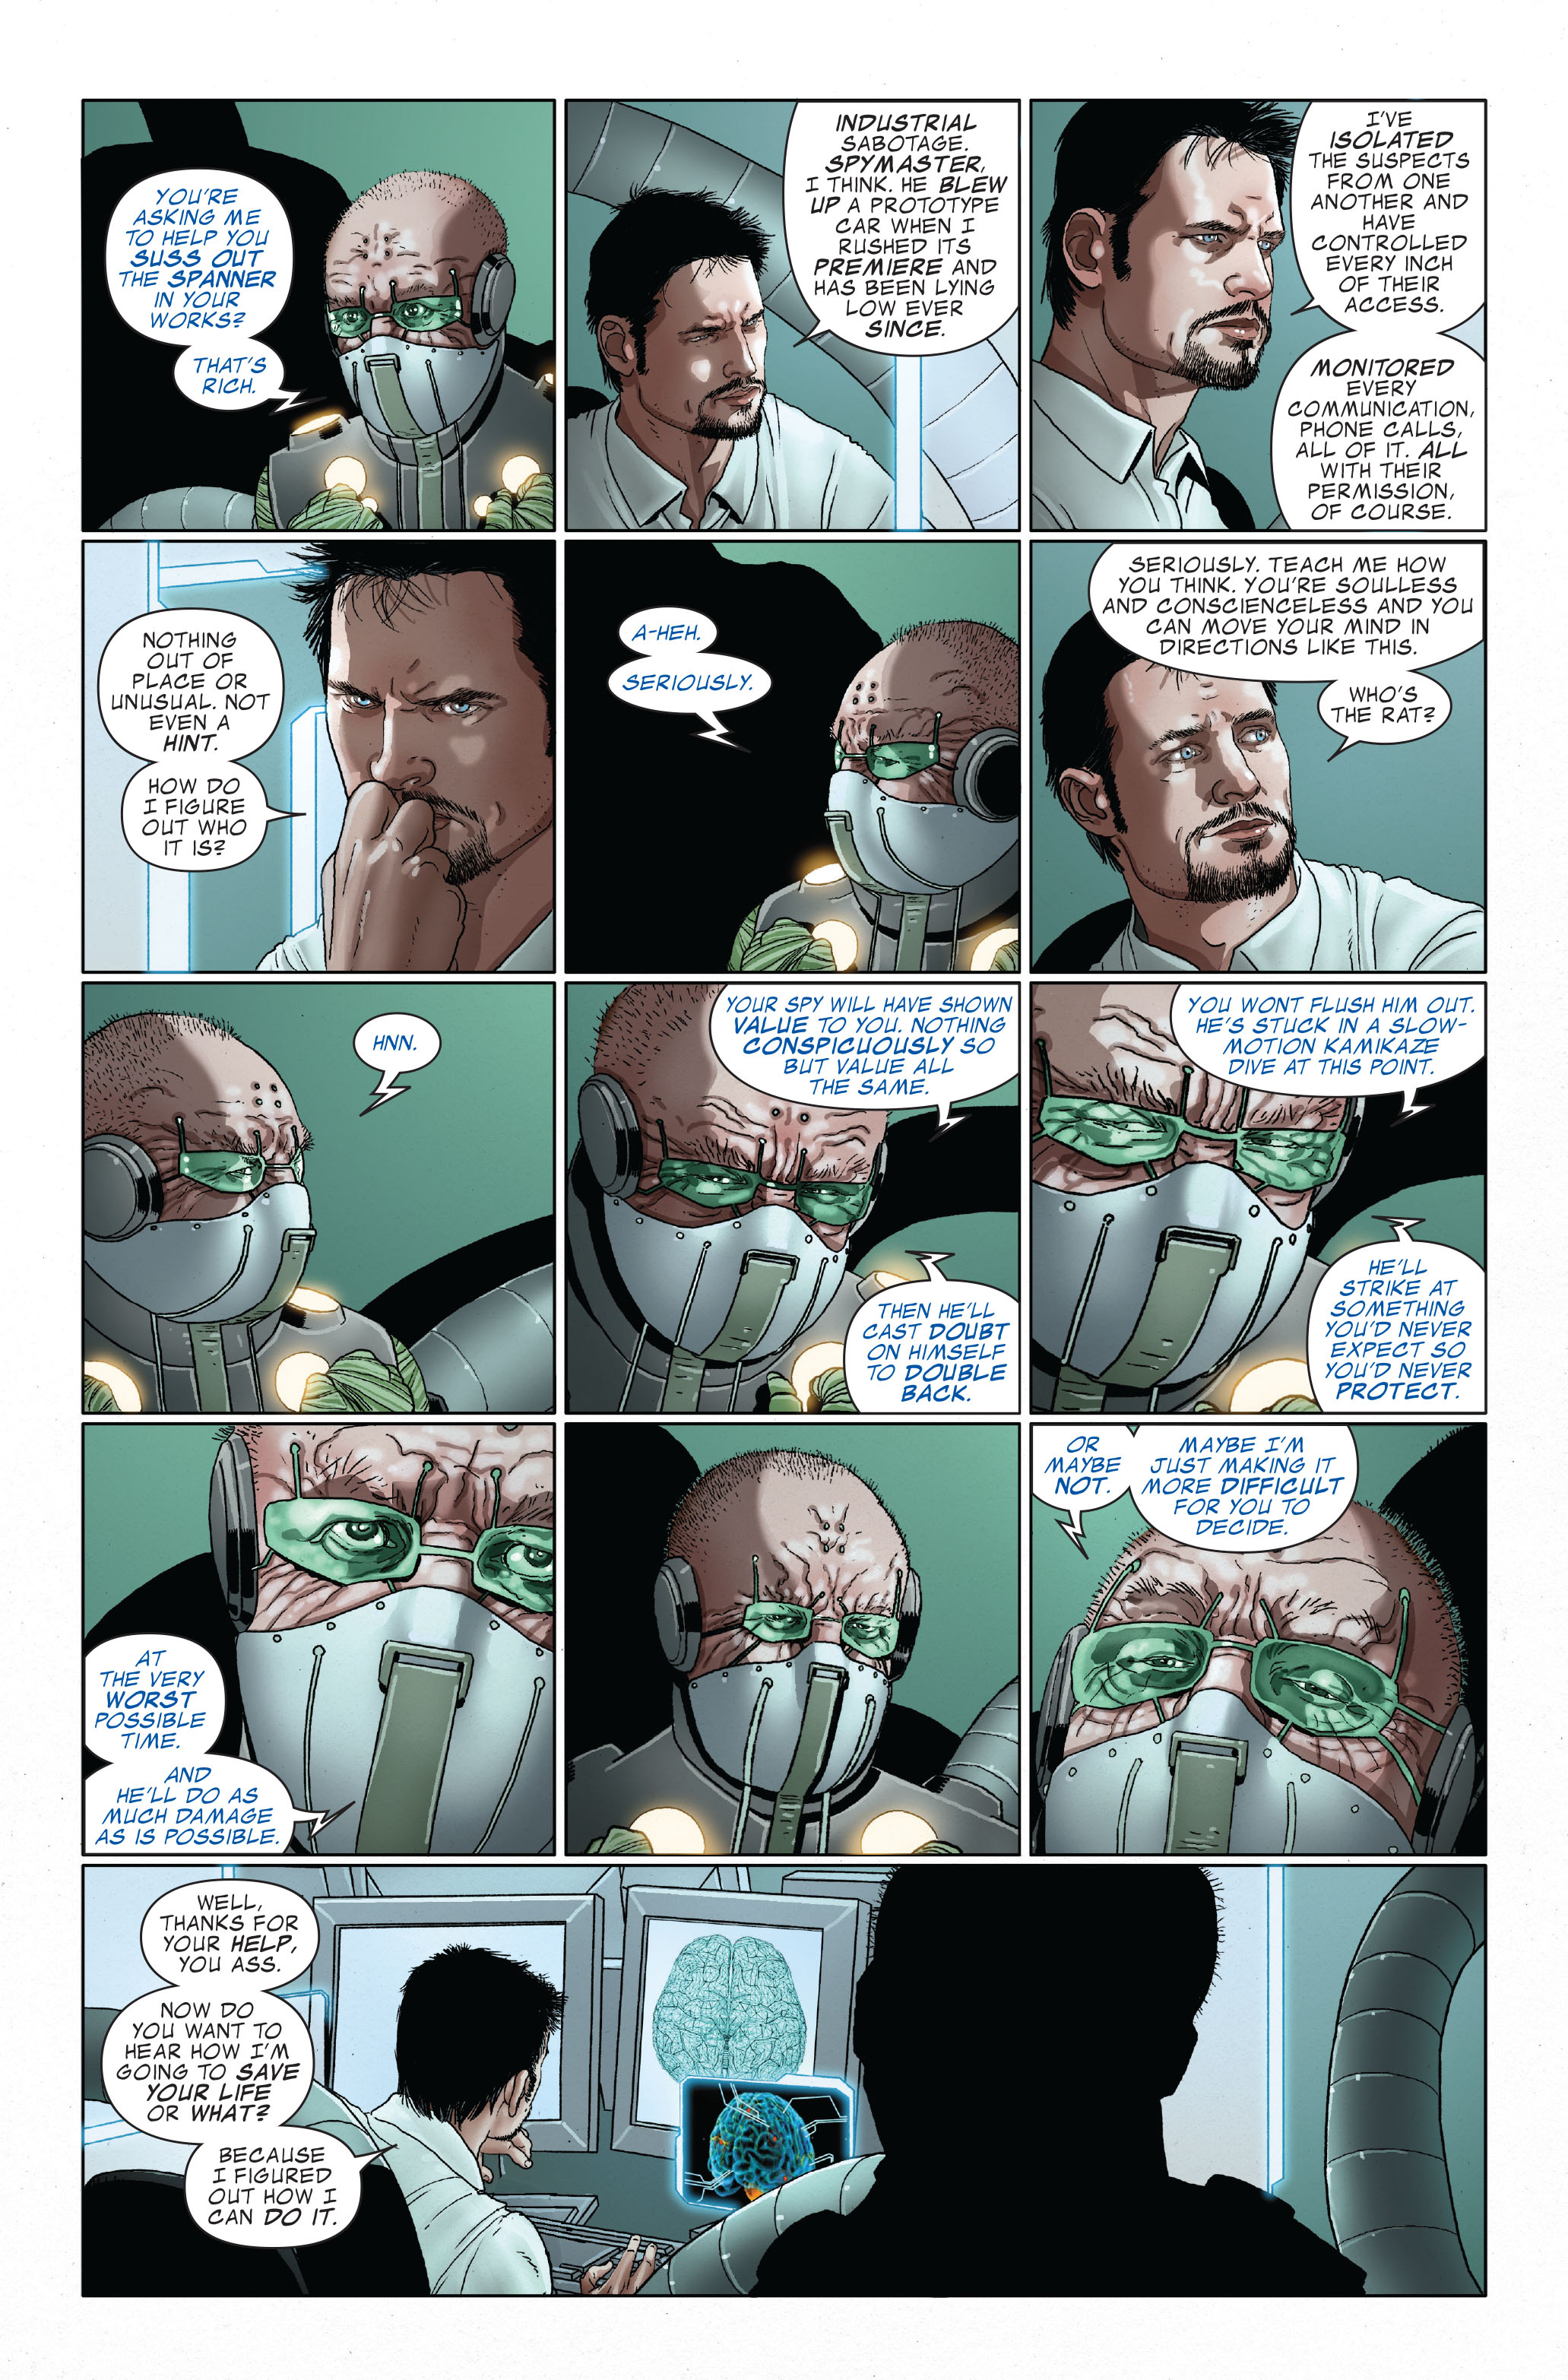 Invincible Iron Man (2008) 502 Page 7